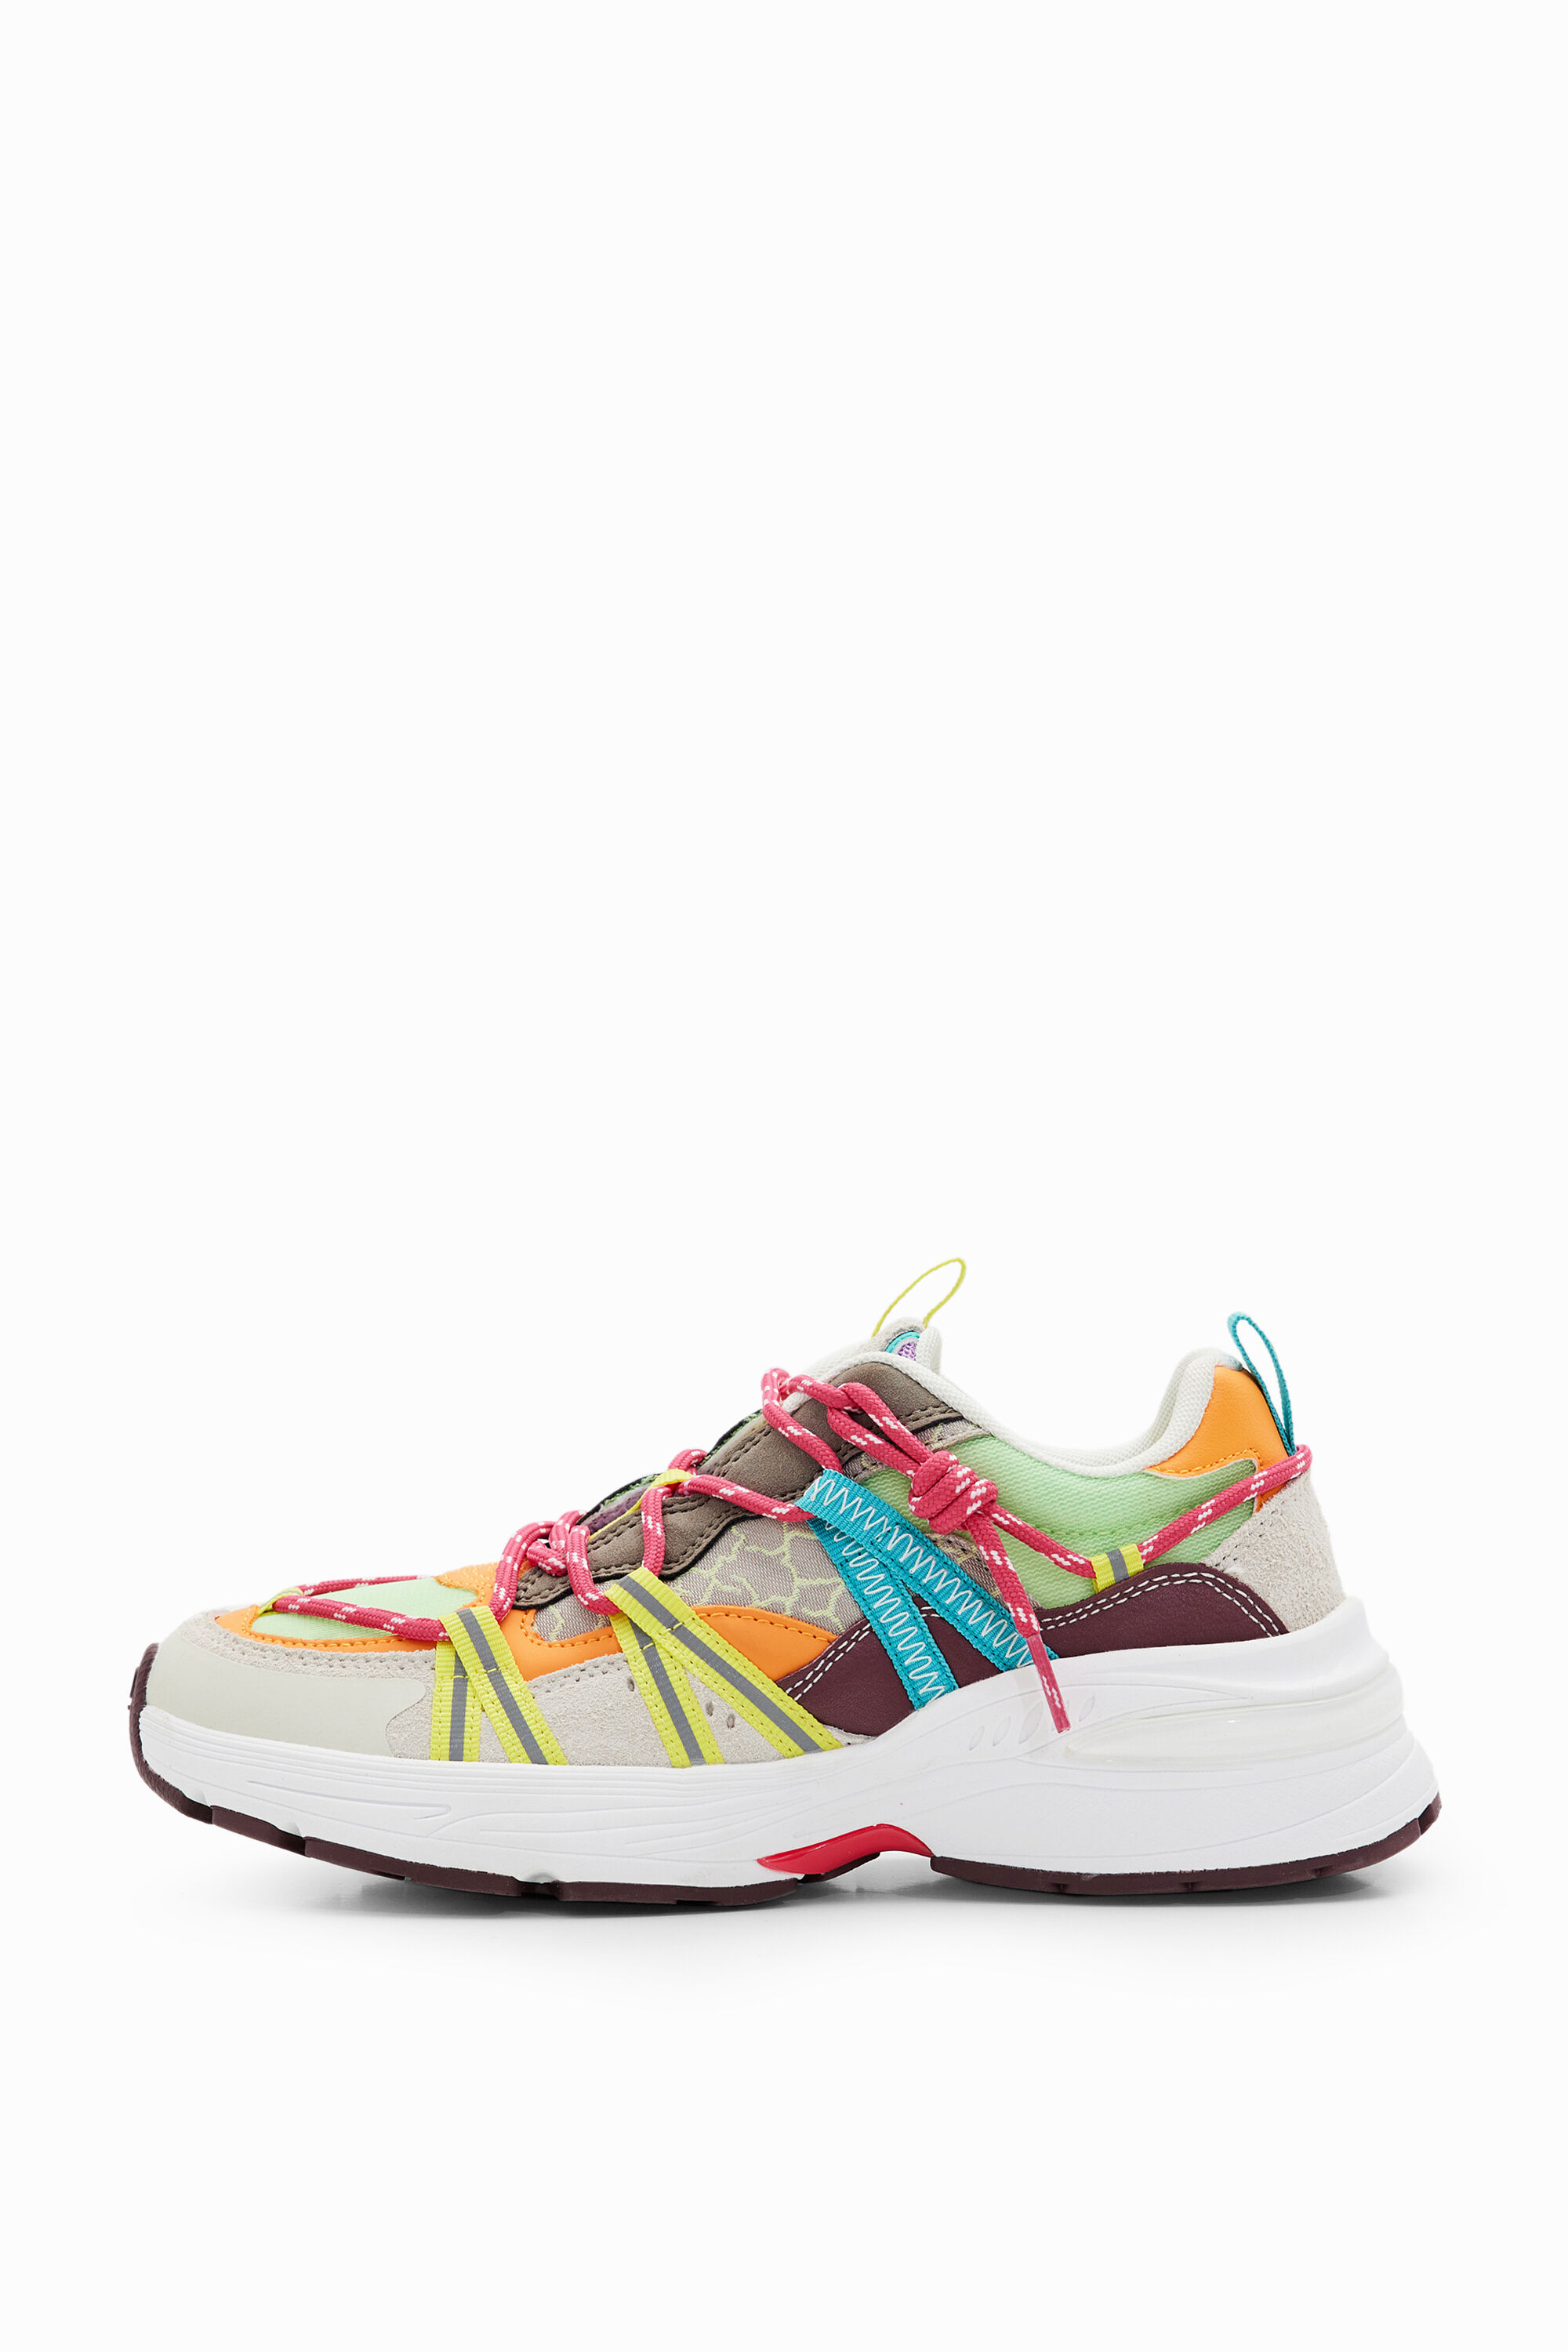 Desigual Trekking Running Sneakers In Material Finishes